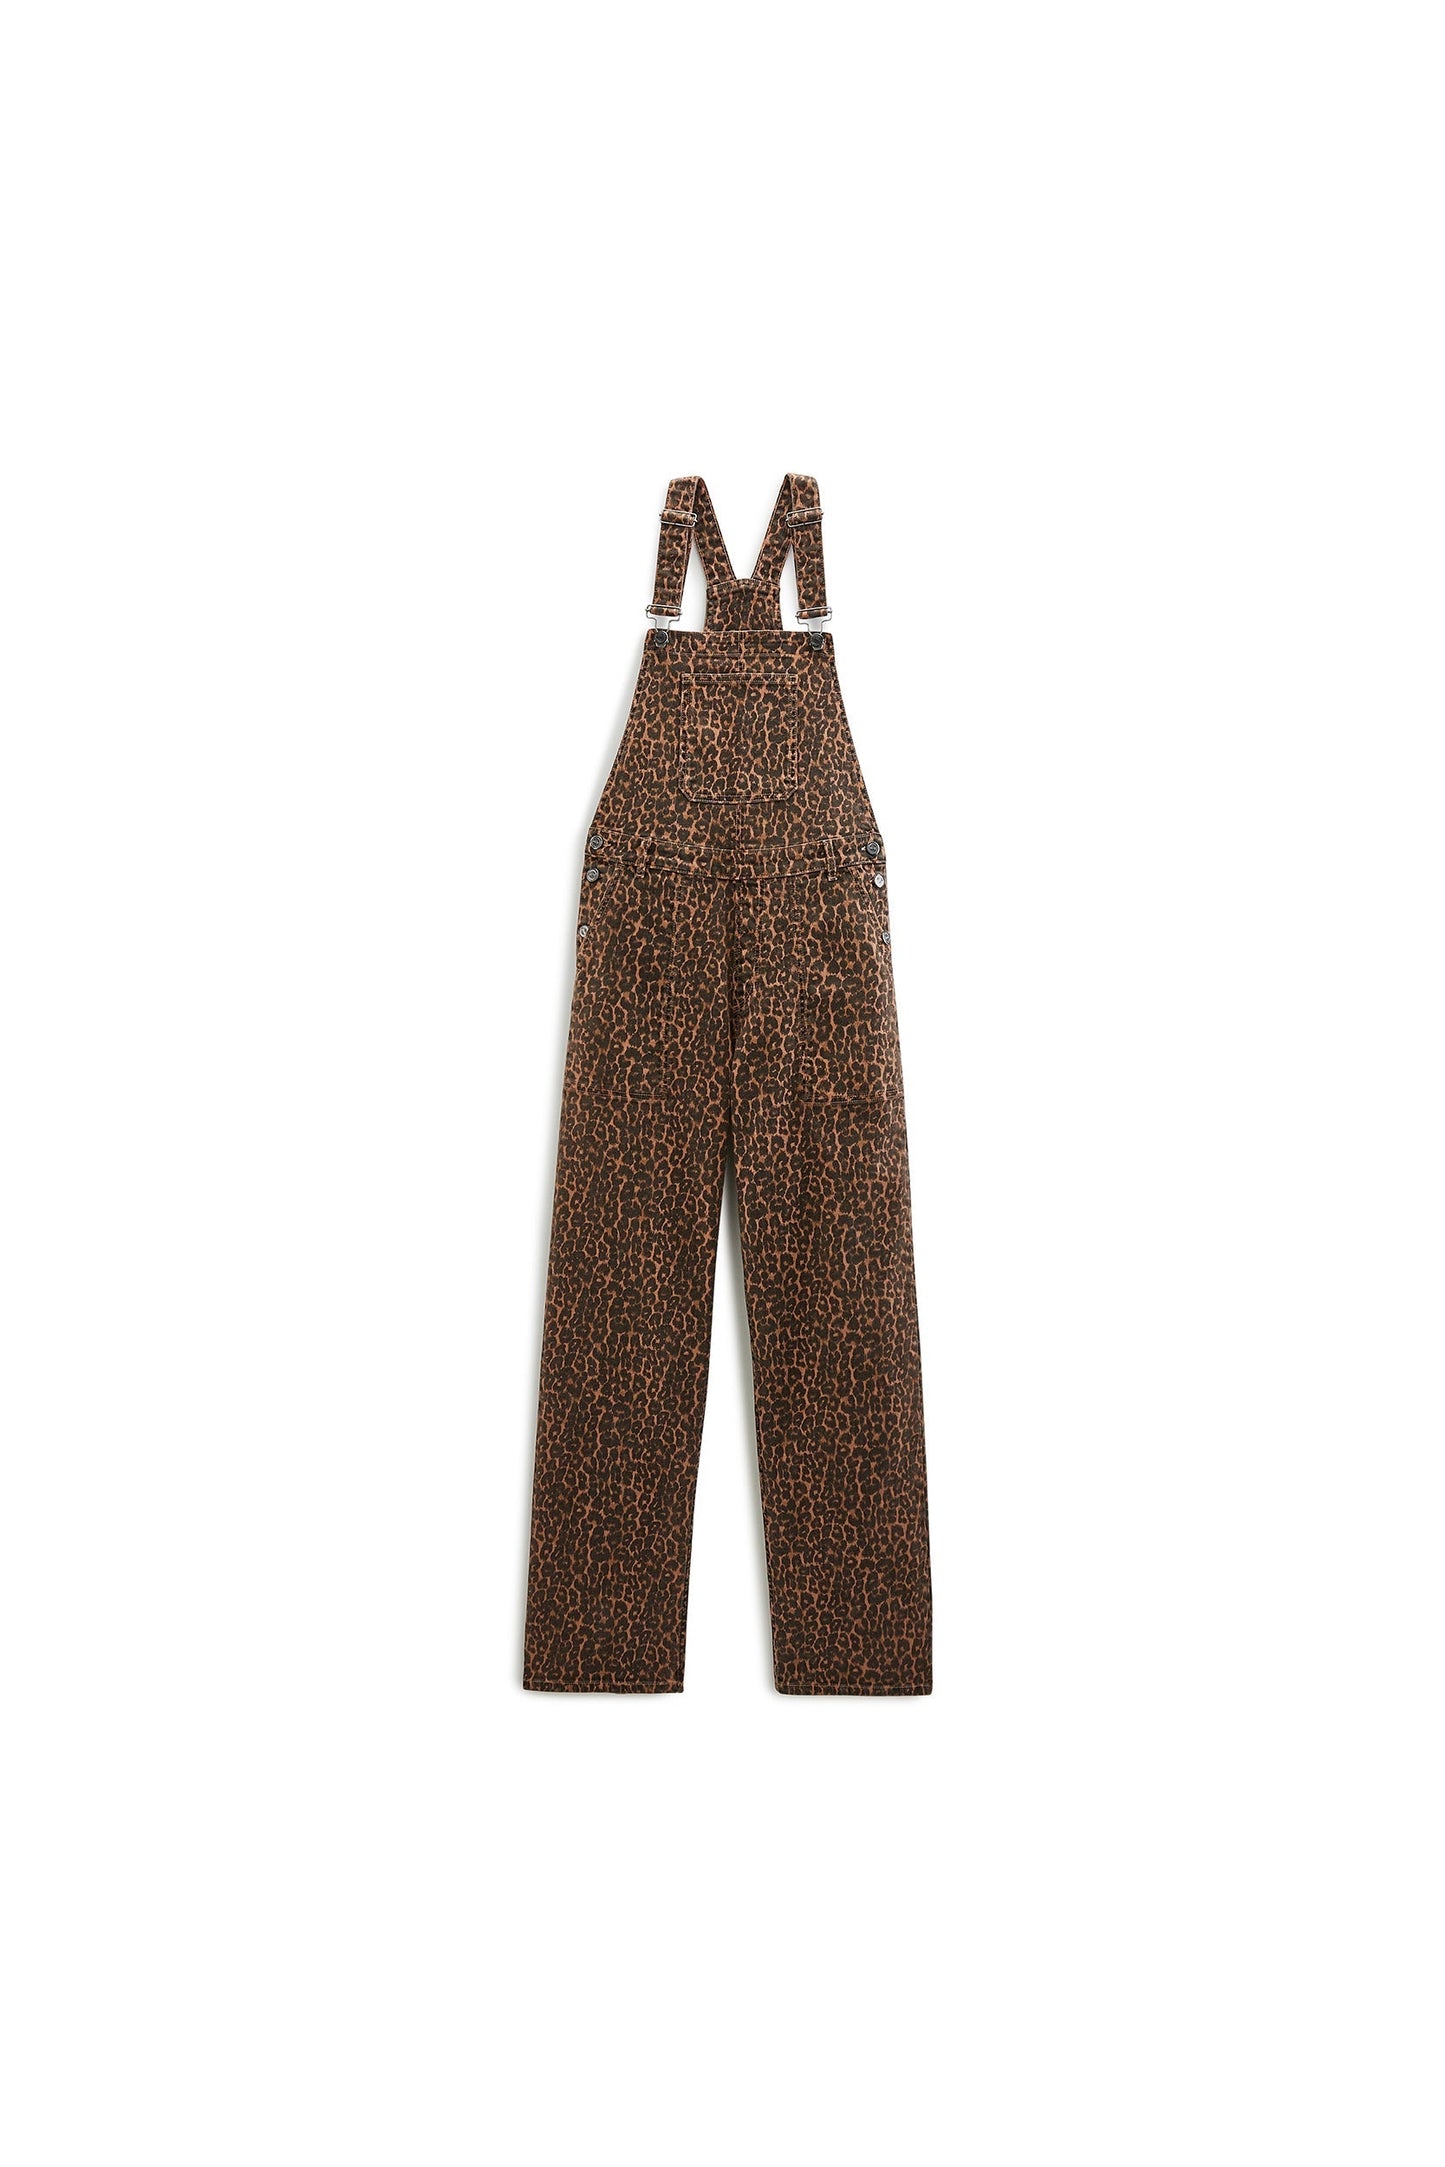 Leopard Jersey Dungarees Charcoal – The Fashion Lab